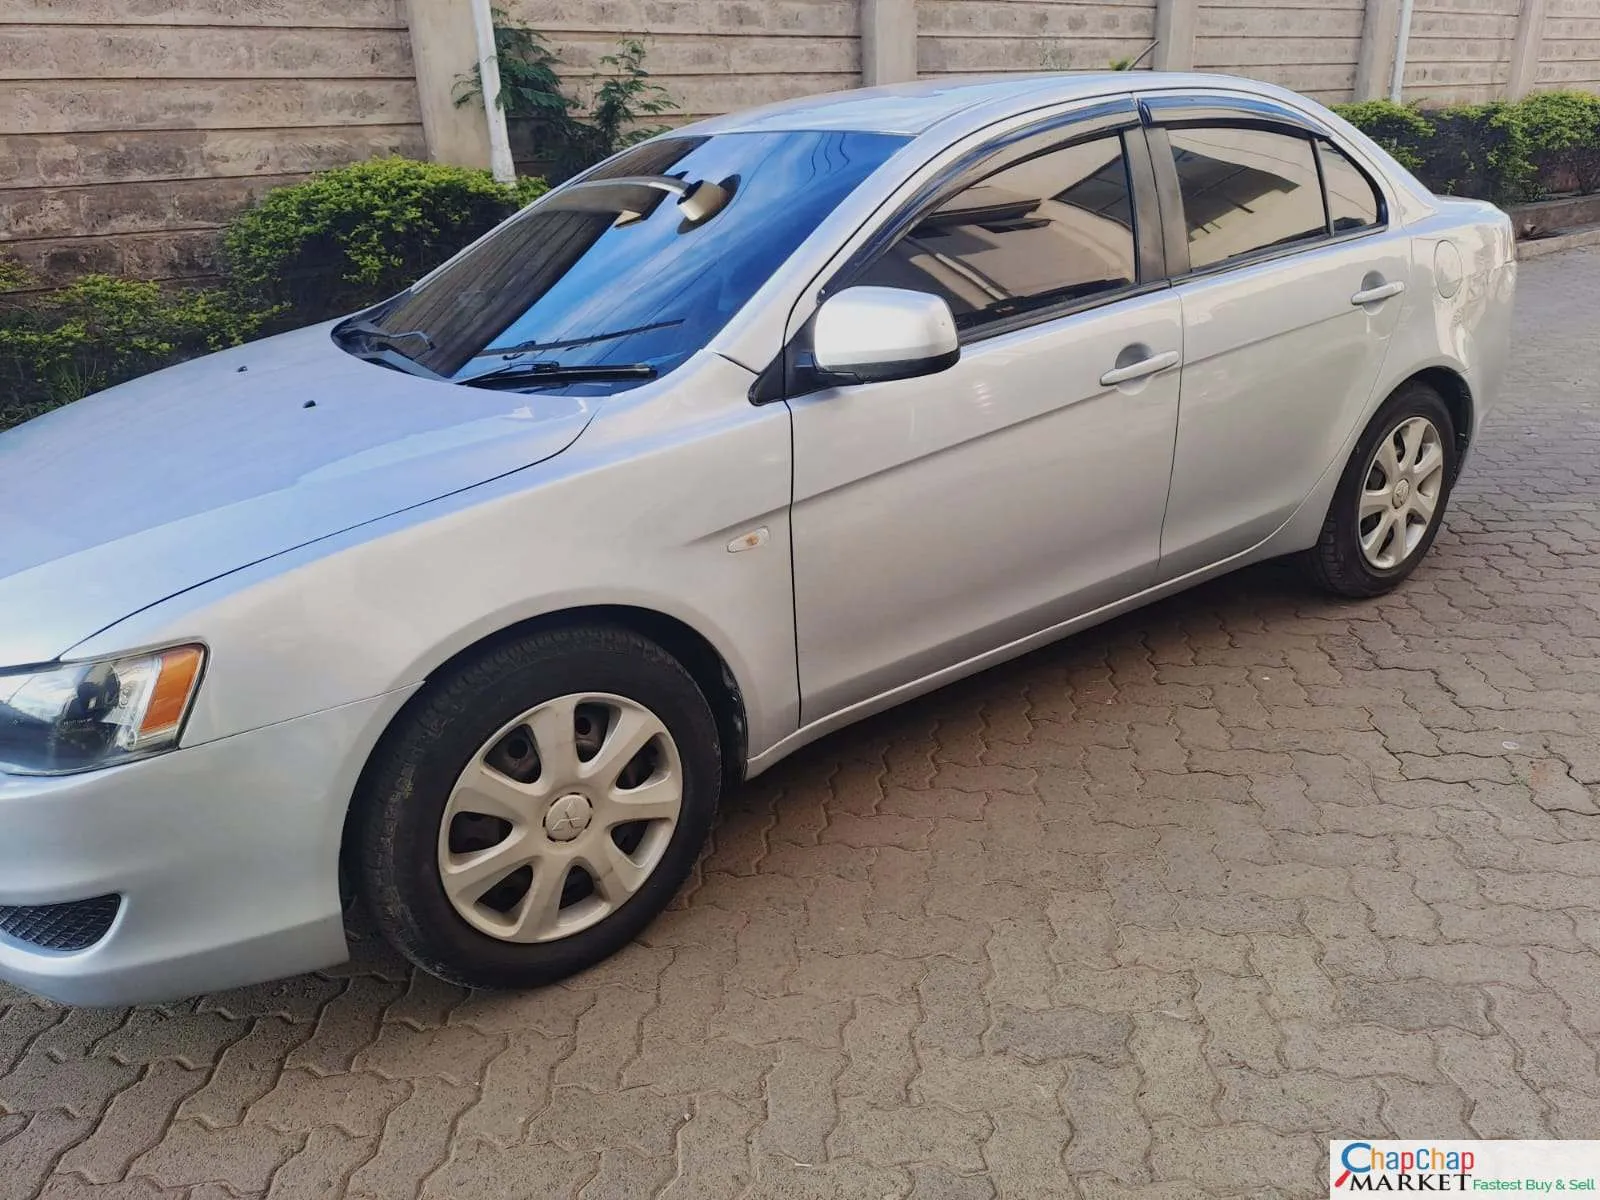 Mitsubishi Galant Fortis Quick sale You Pay 30% Deposit Trade in Ok EXCLUSIVE Galant Fortis for sale in kenya hire purchase installments